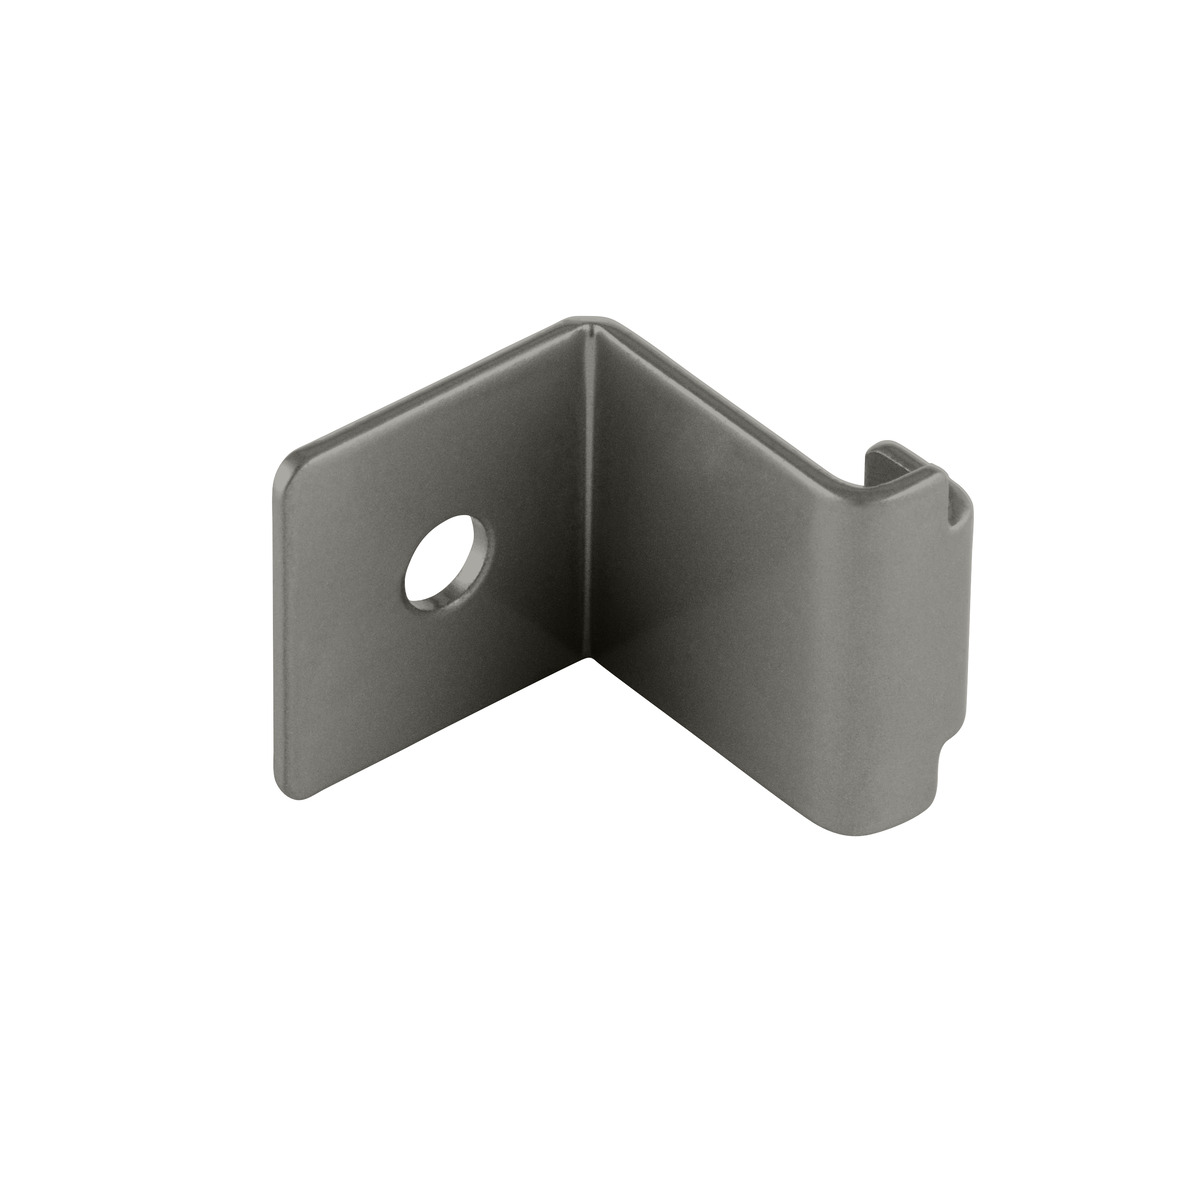 Elfa Hang Standard Wall Clips Pkg/2 | The Container Store